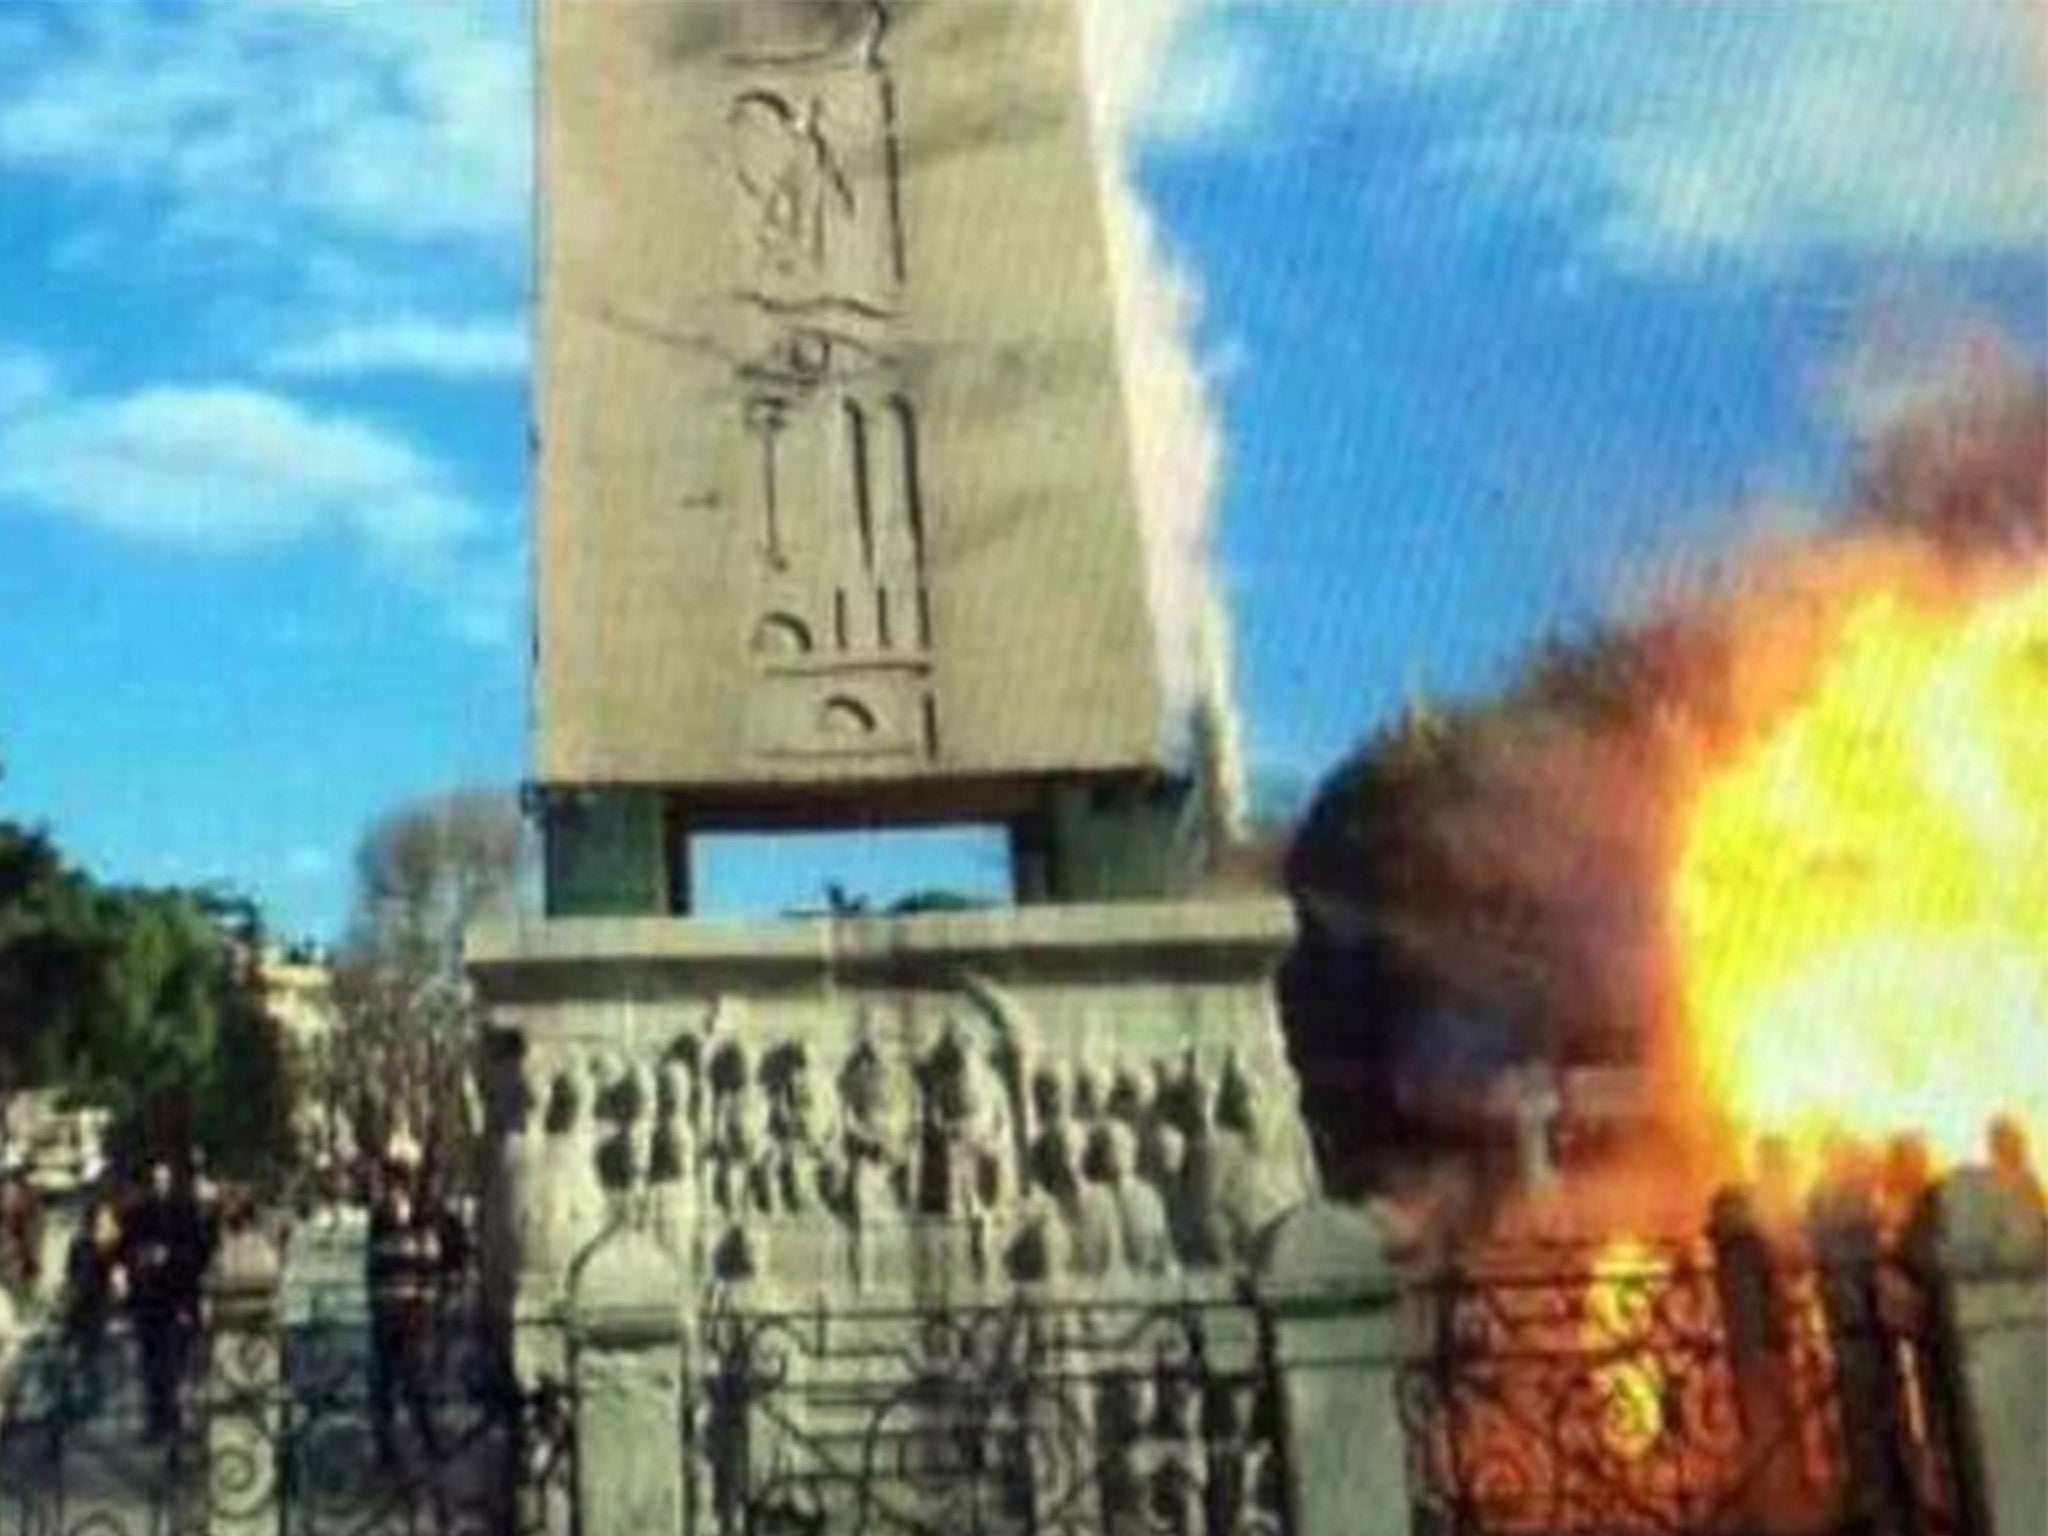 The explosion occurred yesterday at Sultanahmet Square near a Roman obelisk, in a district of Istanbul popular with tourists. Of the 10 dead, eight were Germans and one Peruvian